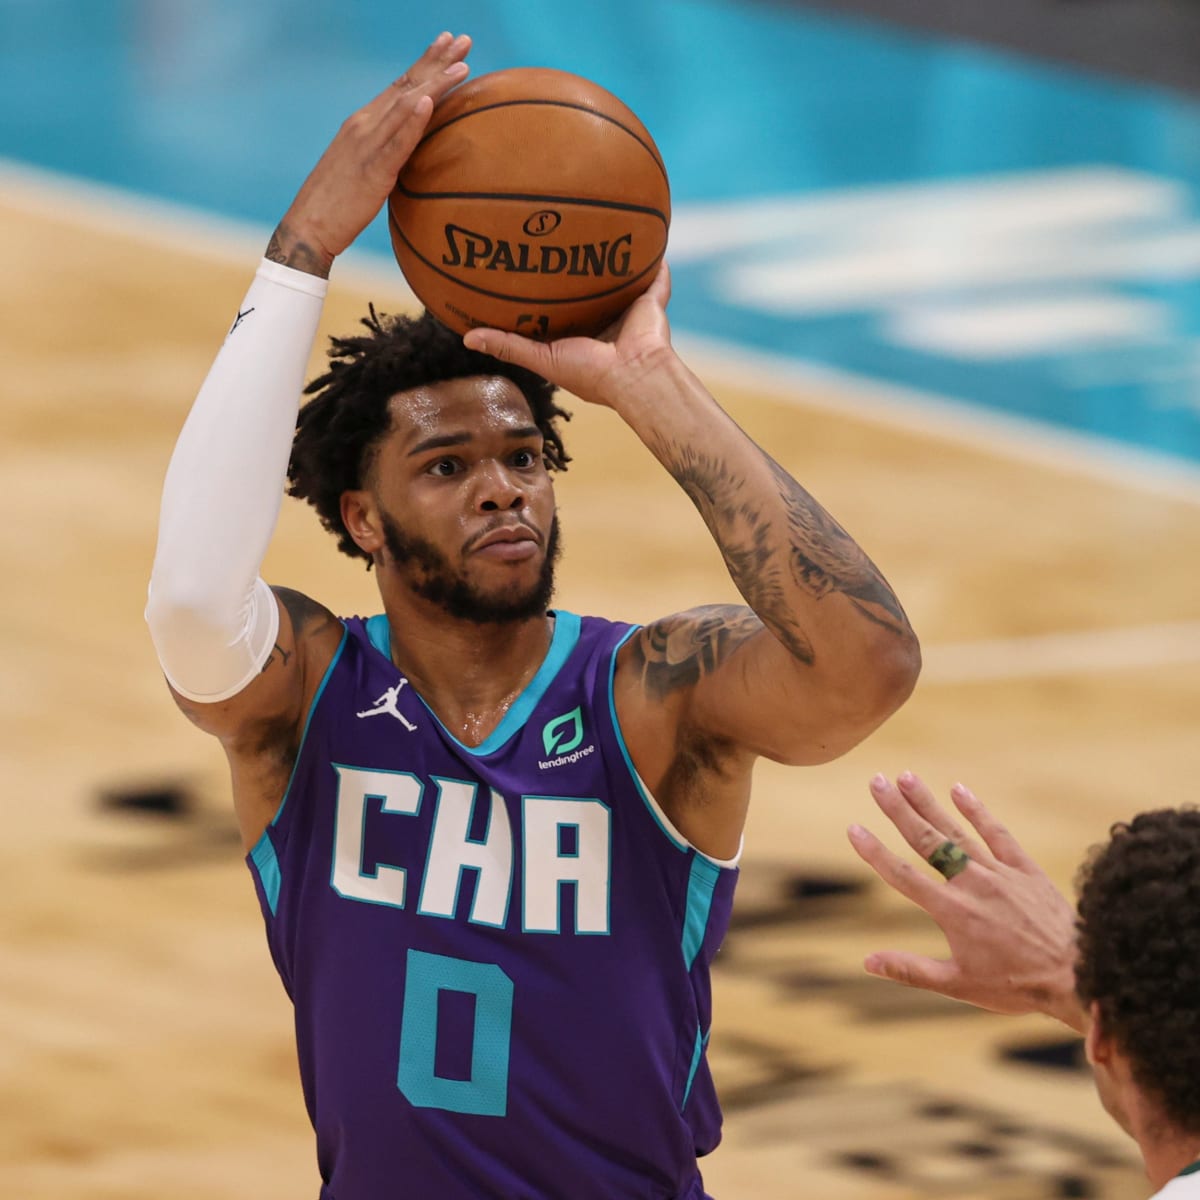 Hornets' Miles Bridges opens up on year-long absence from NBA